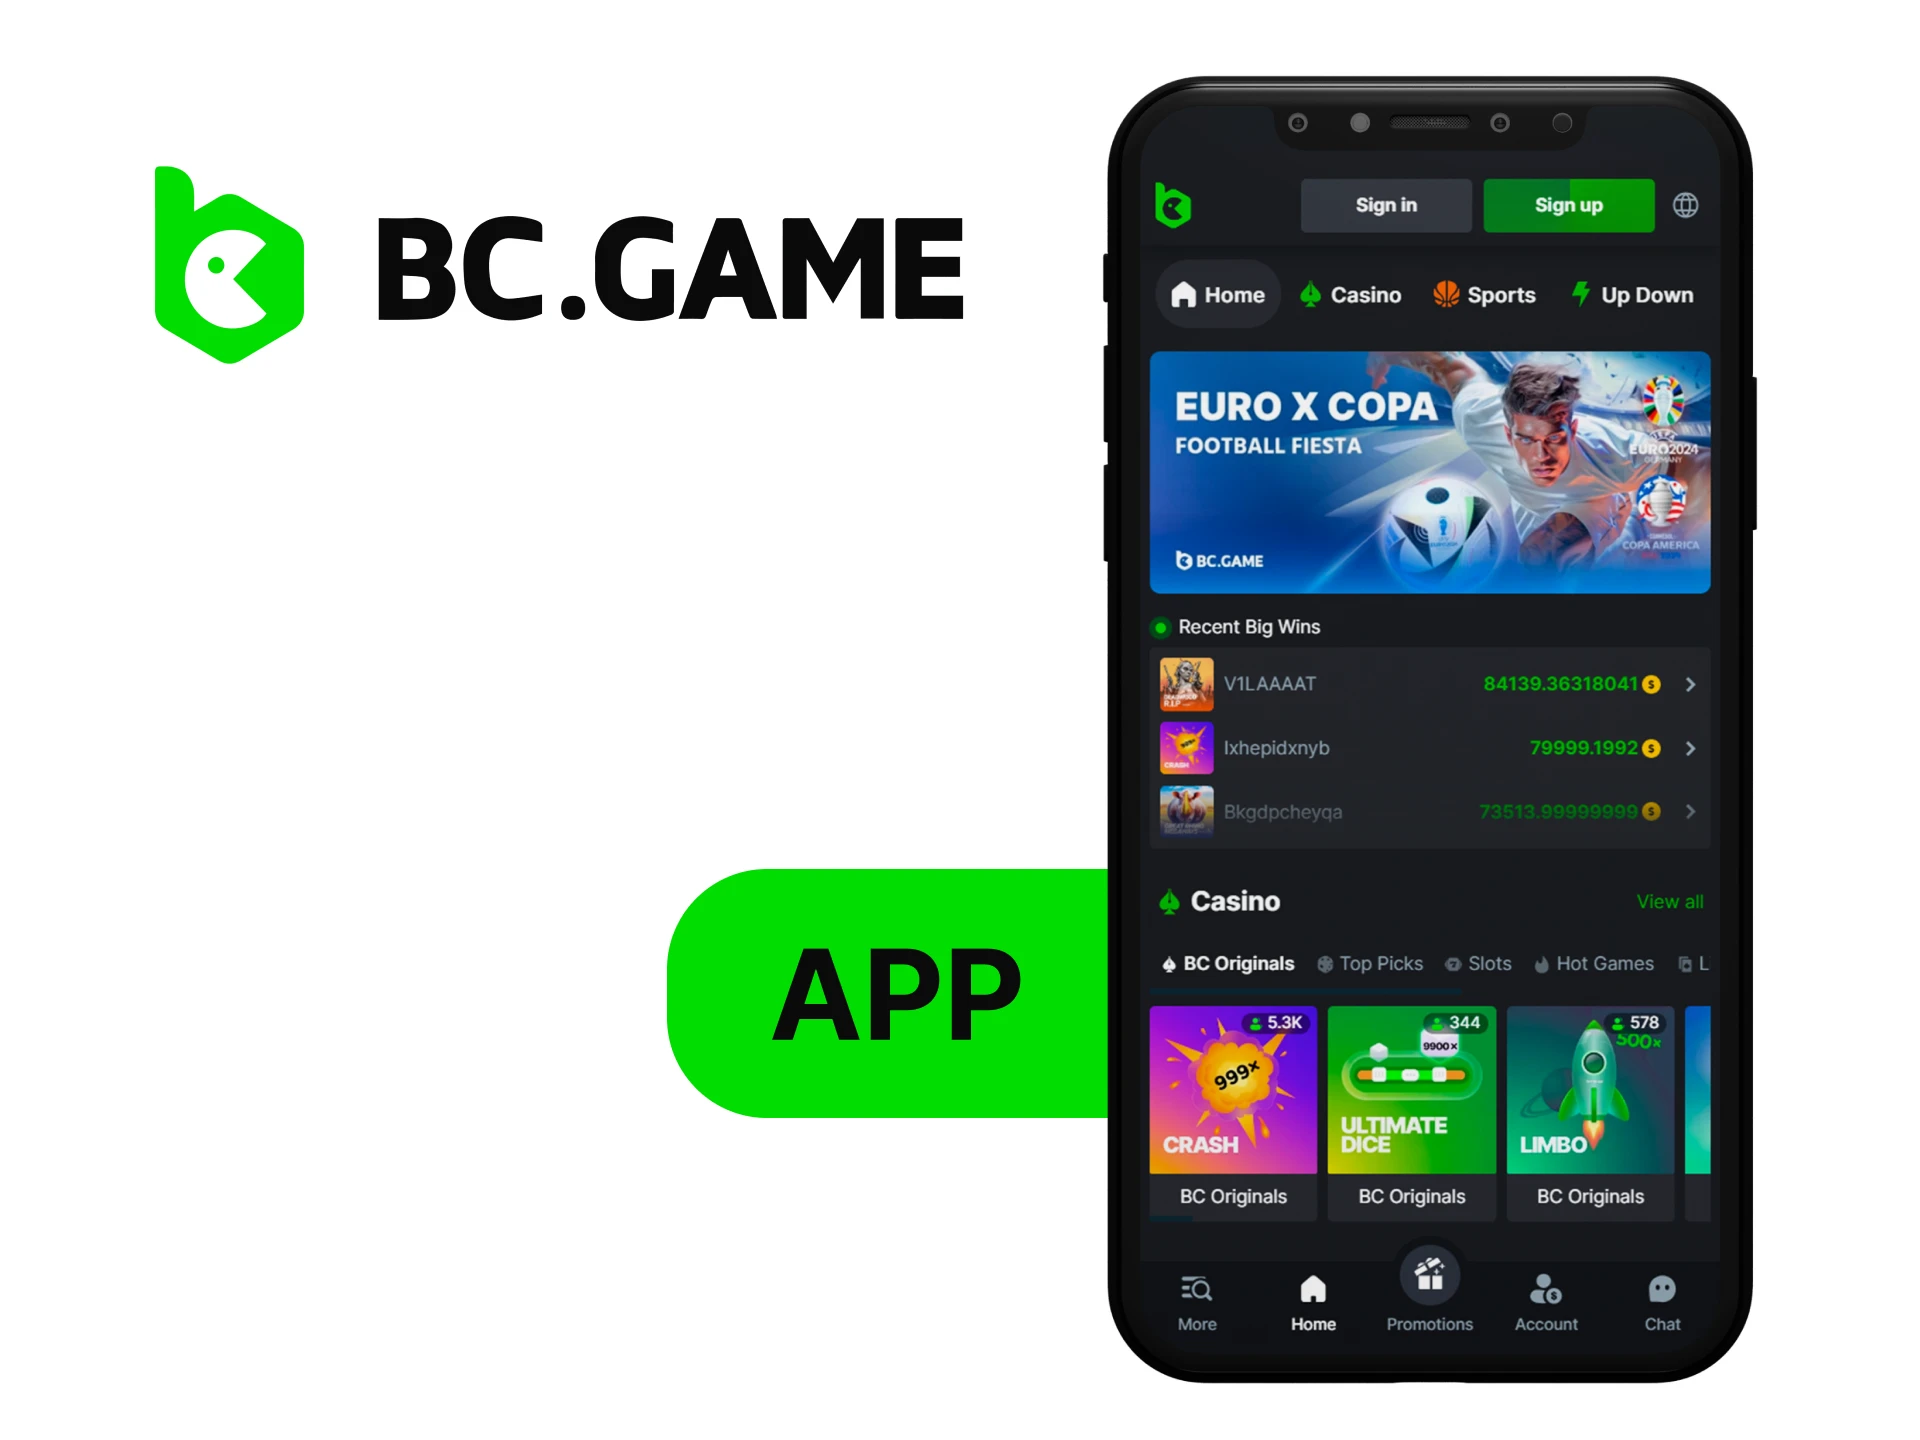 Download the BC Game app and start betting on cricket.